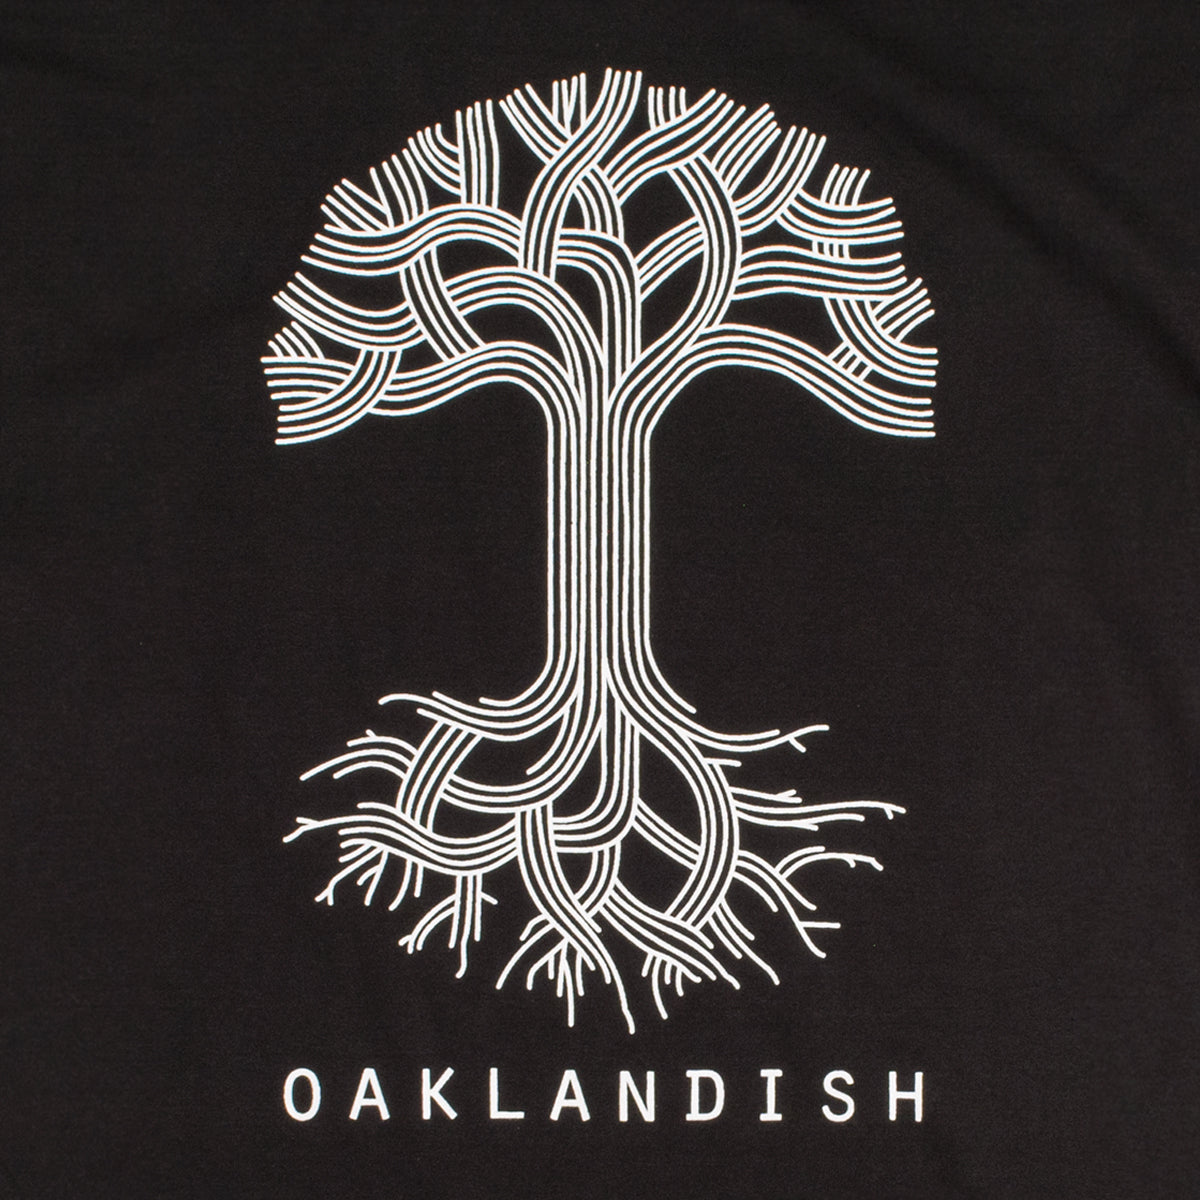 Close-up of a large white Oaklandish tree logo on the chest of a black t-shirt.